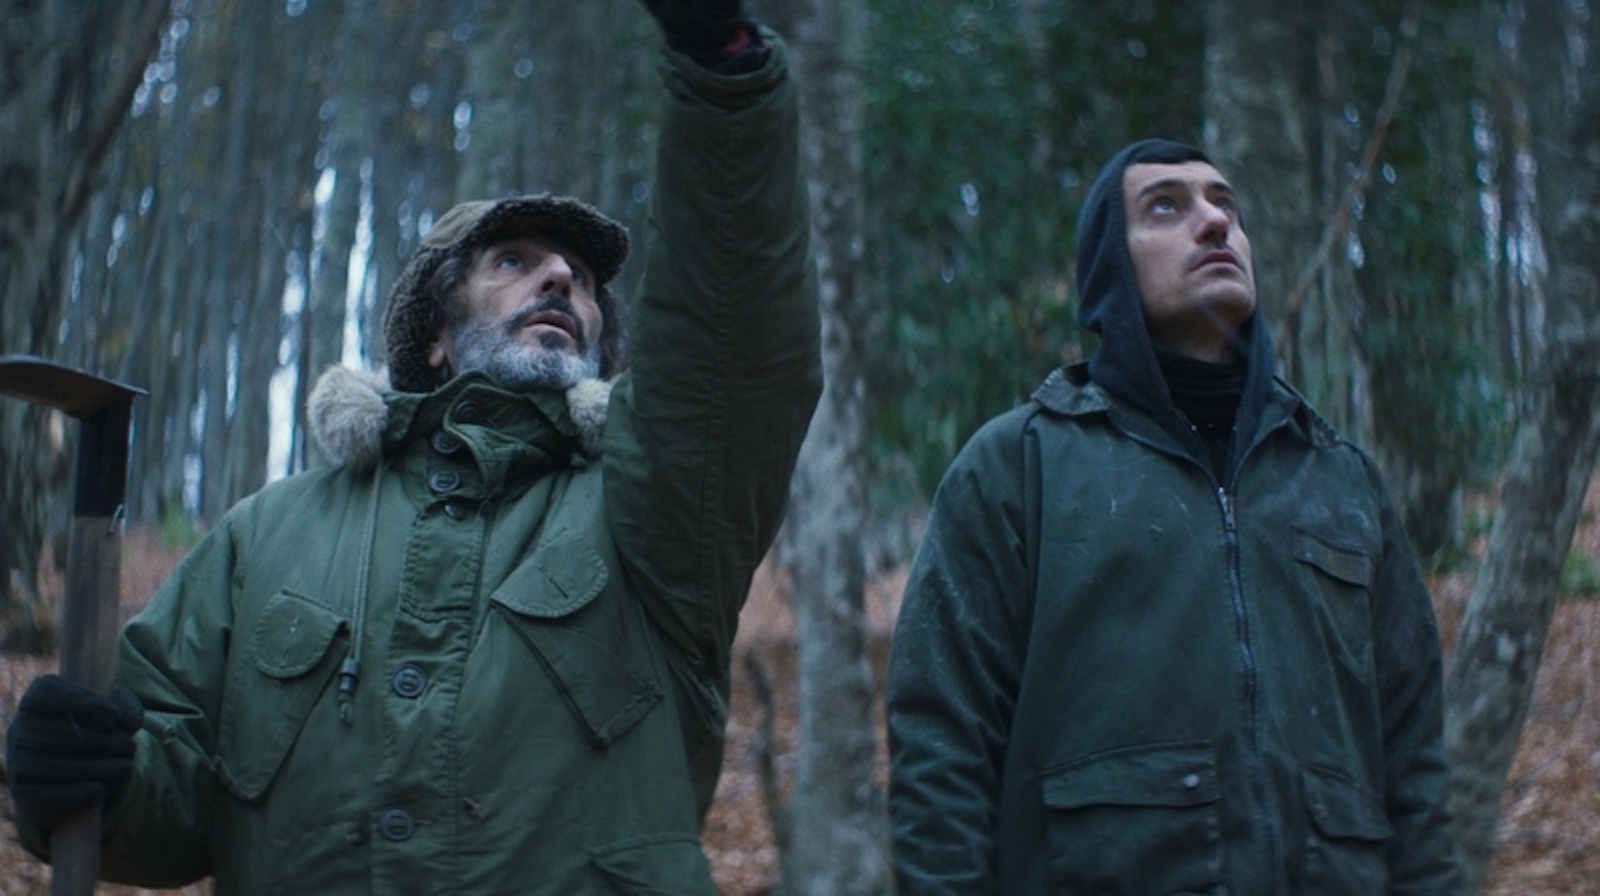 Two men in a forest look up at the trees , one pointing with his arm.